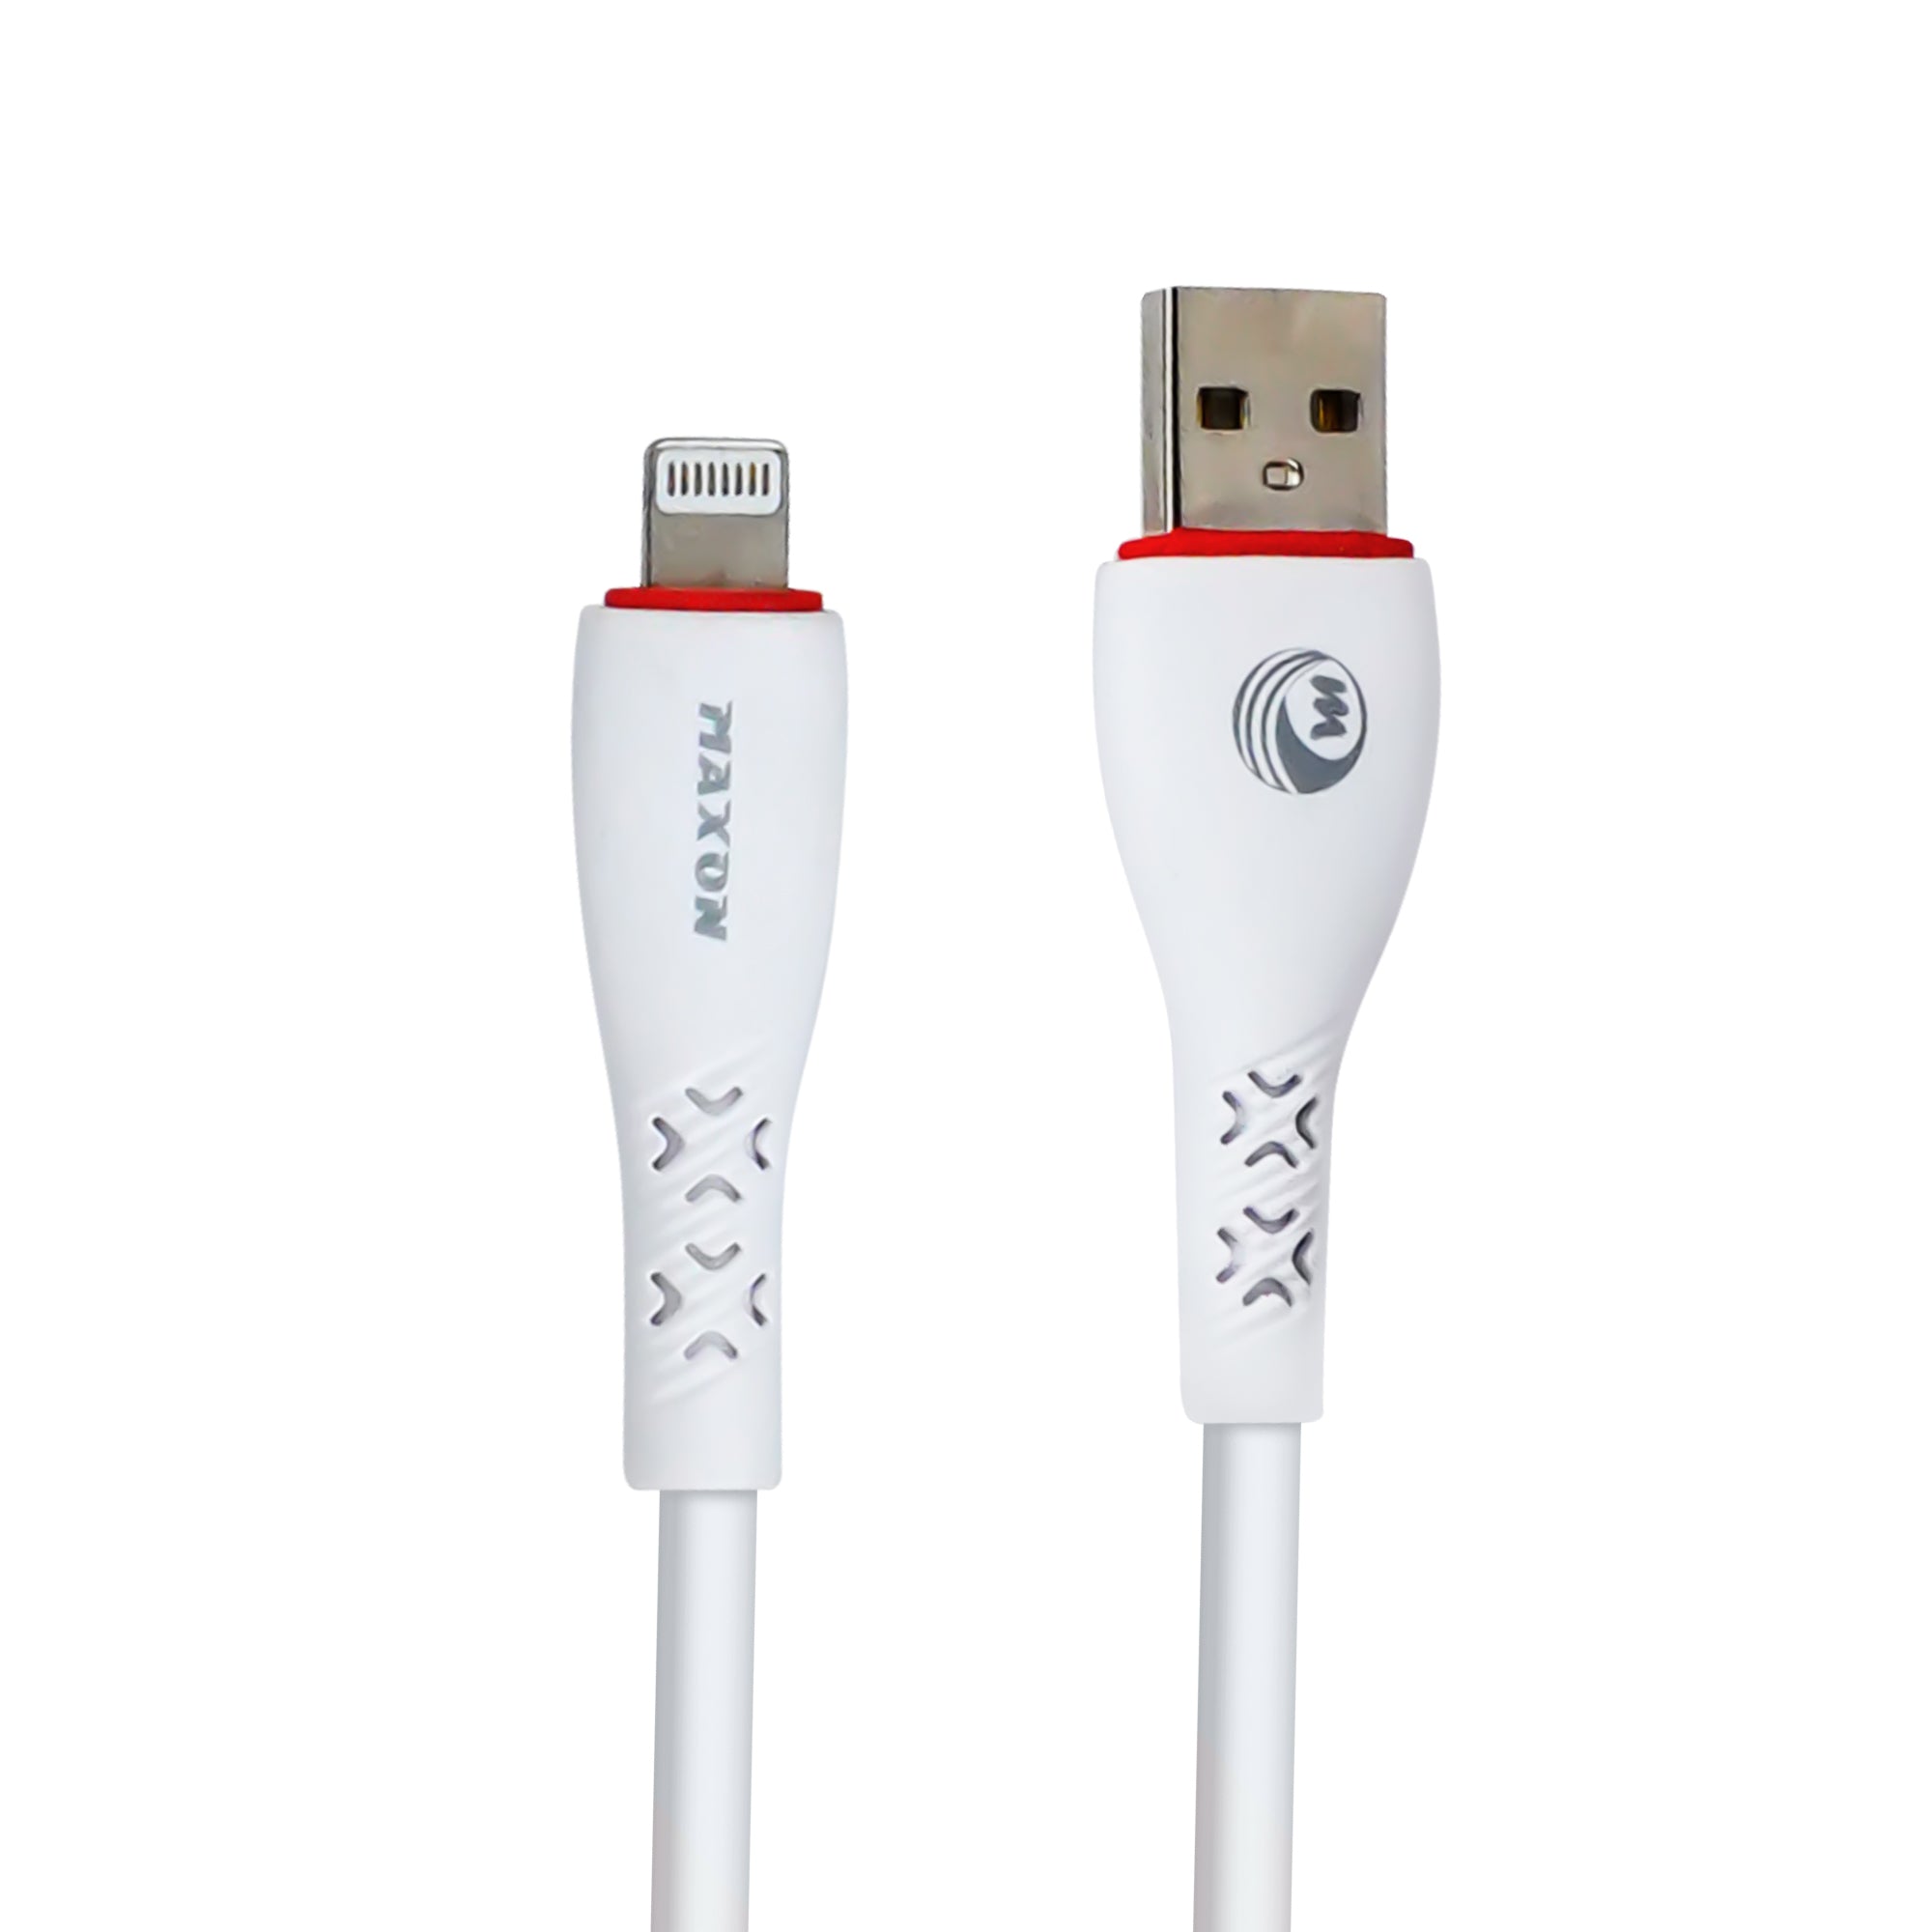 Maxon R-501 iPhone Data Cable